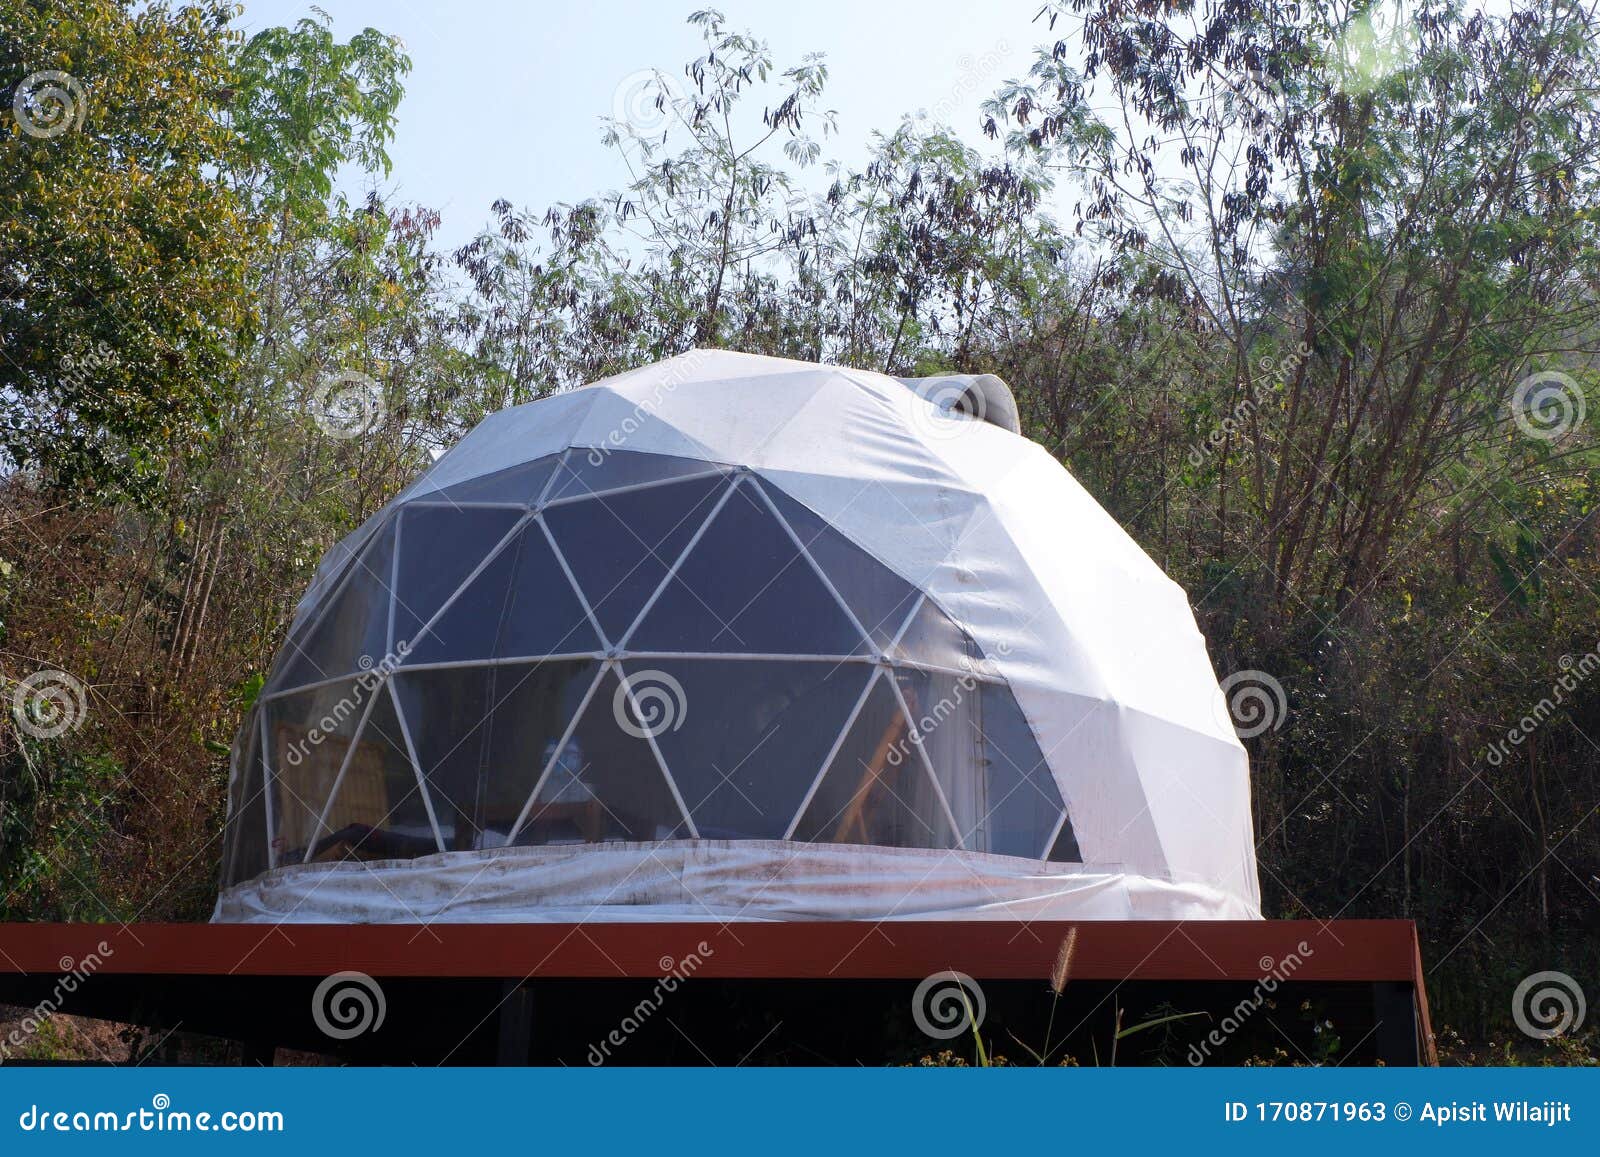 geodesic dome tents in thailand and asia.